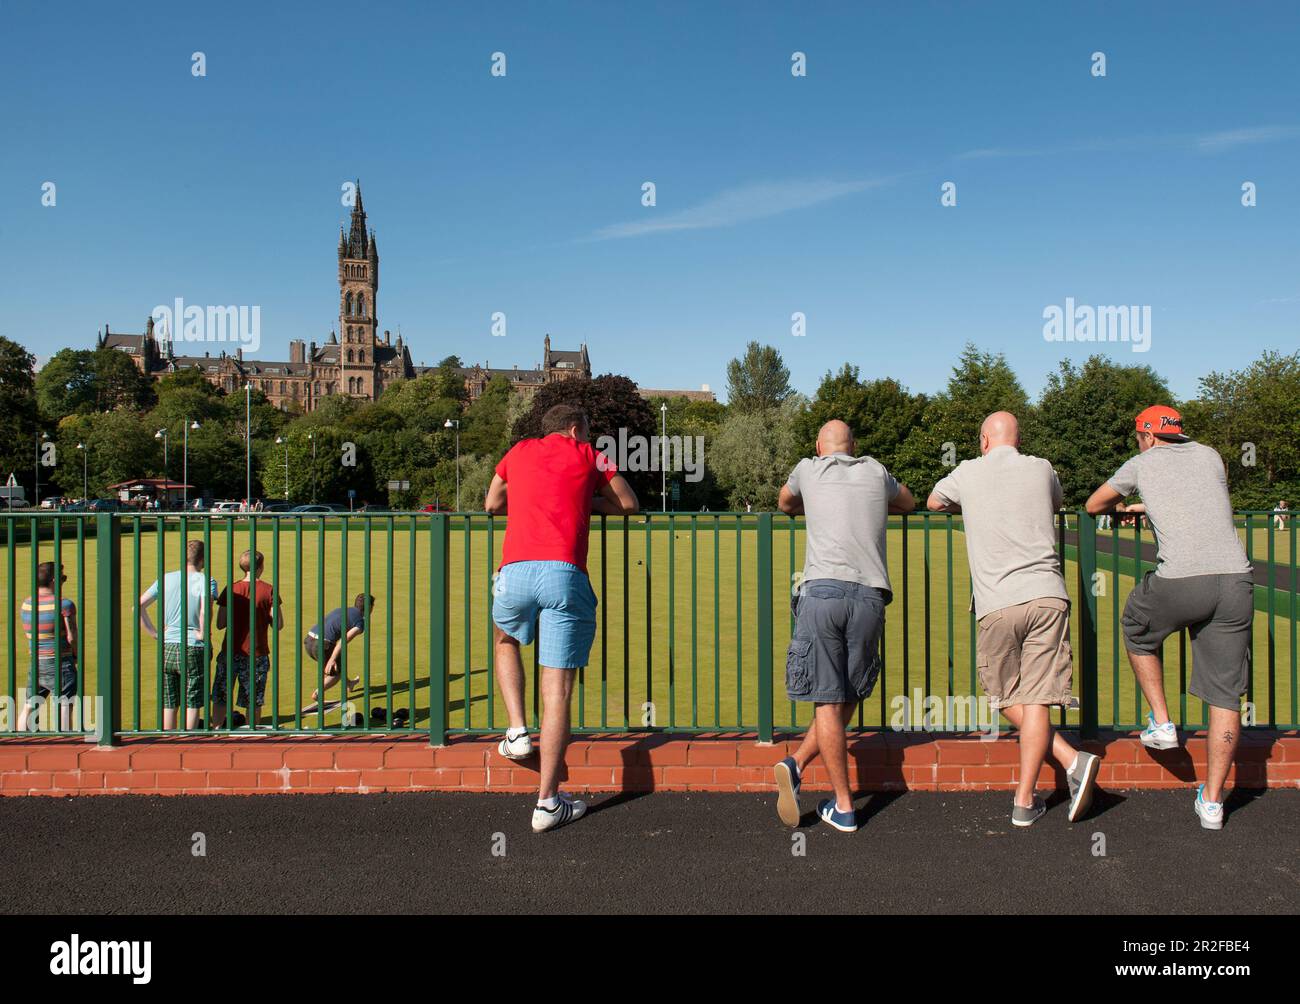 A crowd watches bowls in play on a hot day at the Kelvingrove lawn bowling green in Glasgow, Scotland, UK Stock Photo